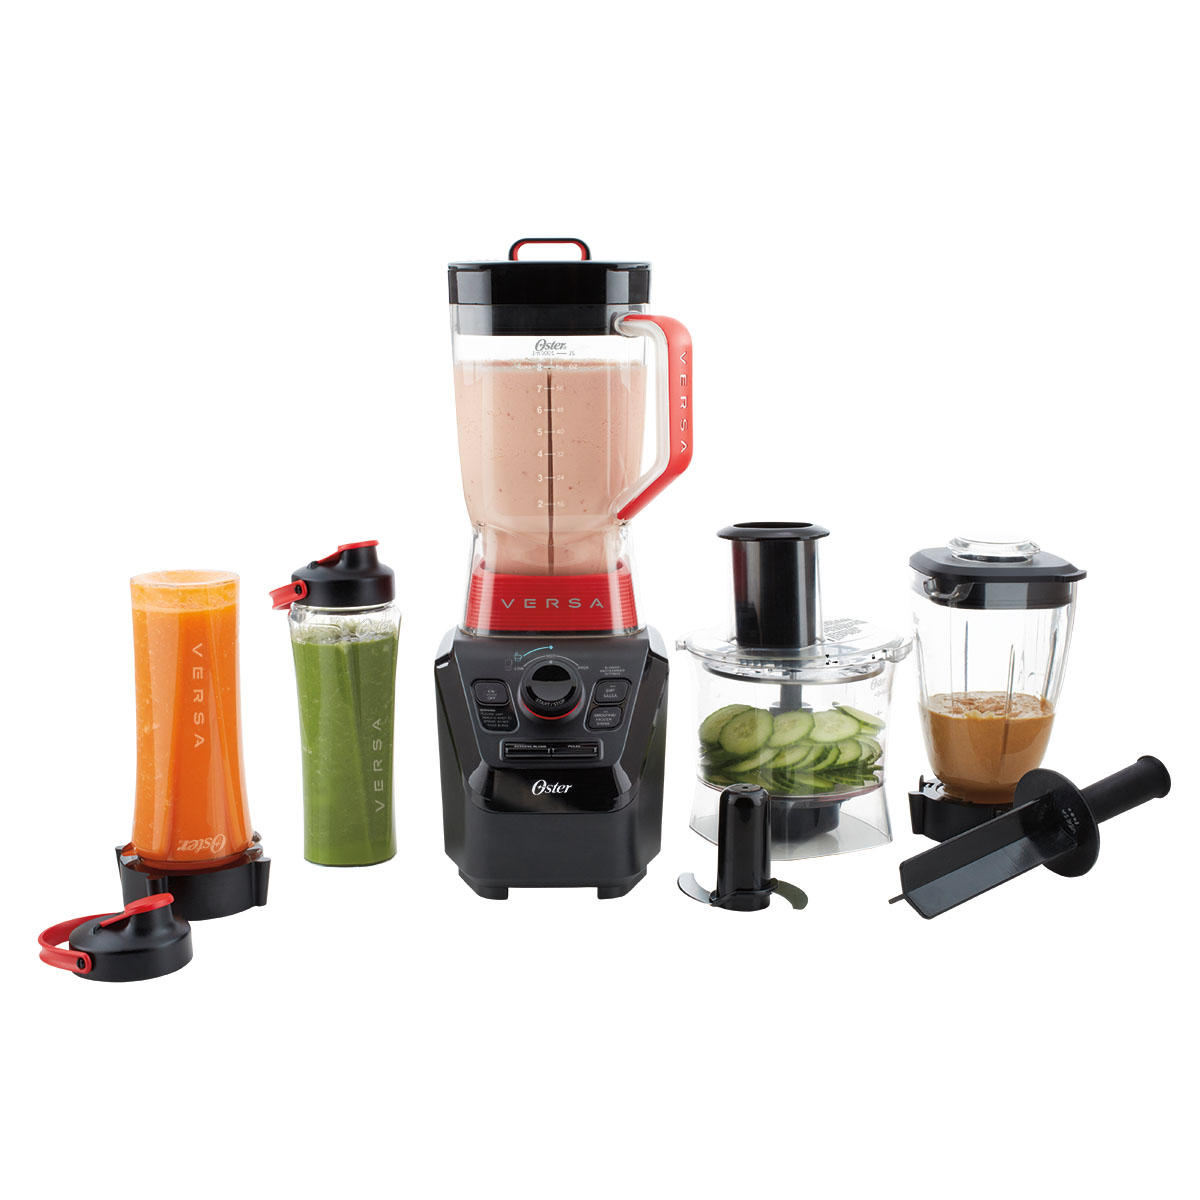 Oster Versa Pro Series blender with food processor and smoothie cups for $130